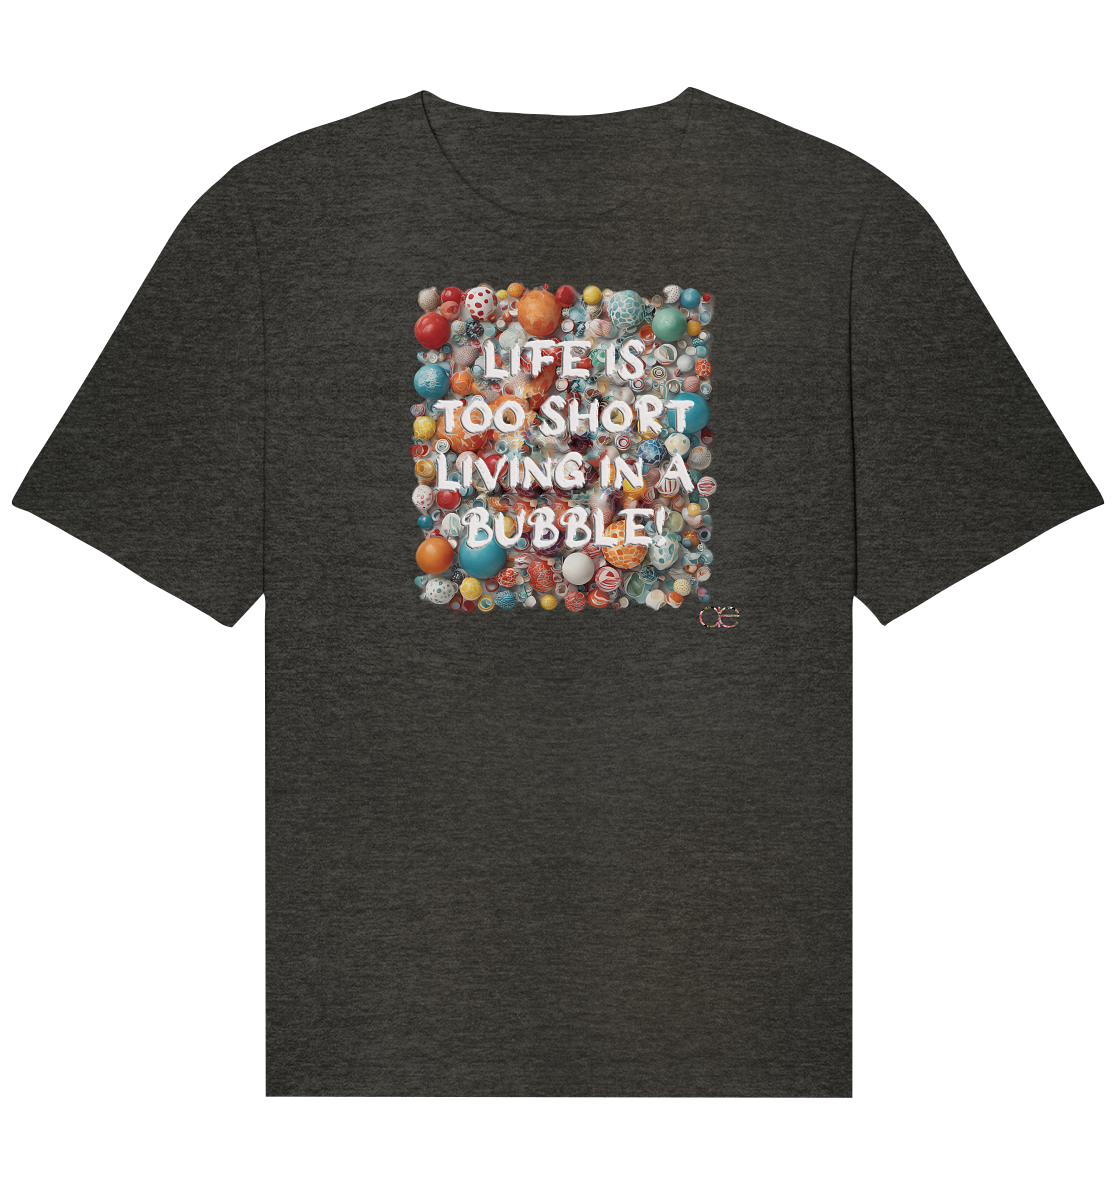 LIFE IS TOO SHORT LIVING IN A BUBBLE  - Organic Relaxed Shirt